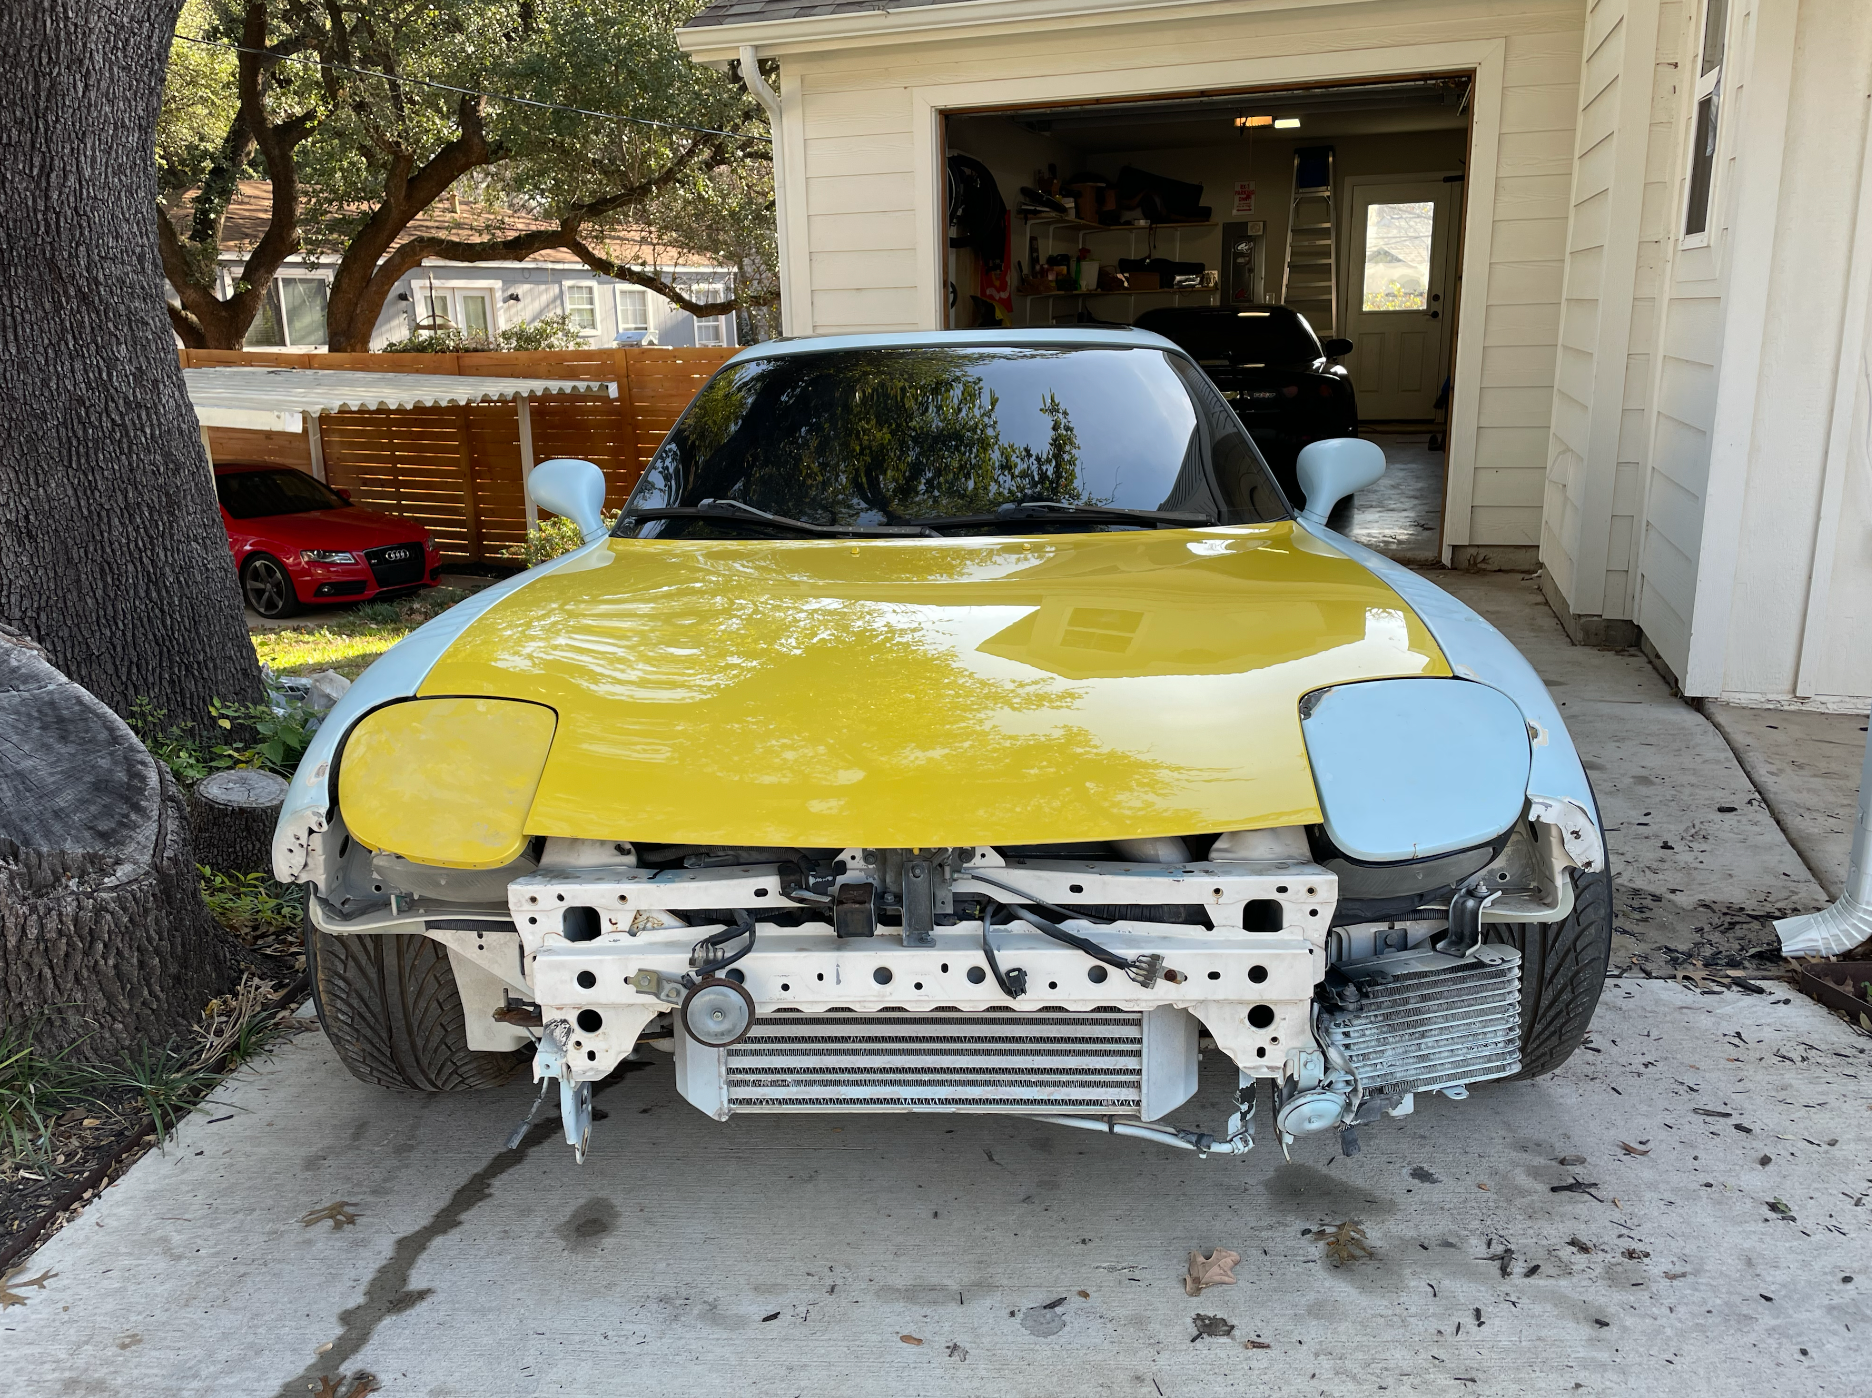 1994 Mazda RX-7 - 1994 Chaste White RX-7 - 79k miles - Upgrades - Needs paint - Used - VIN JM1FD3336R0303240 - 79,000 Miles - Other - 2WD - Manual - Coupe - White - Fort Worth, TX 76111, United States